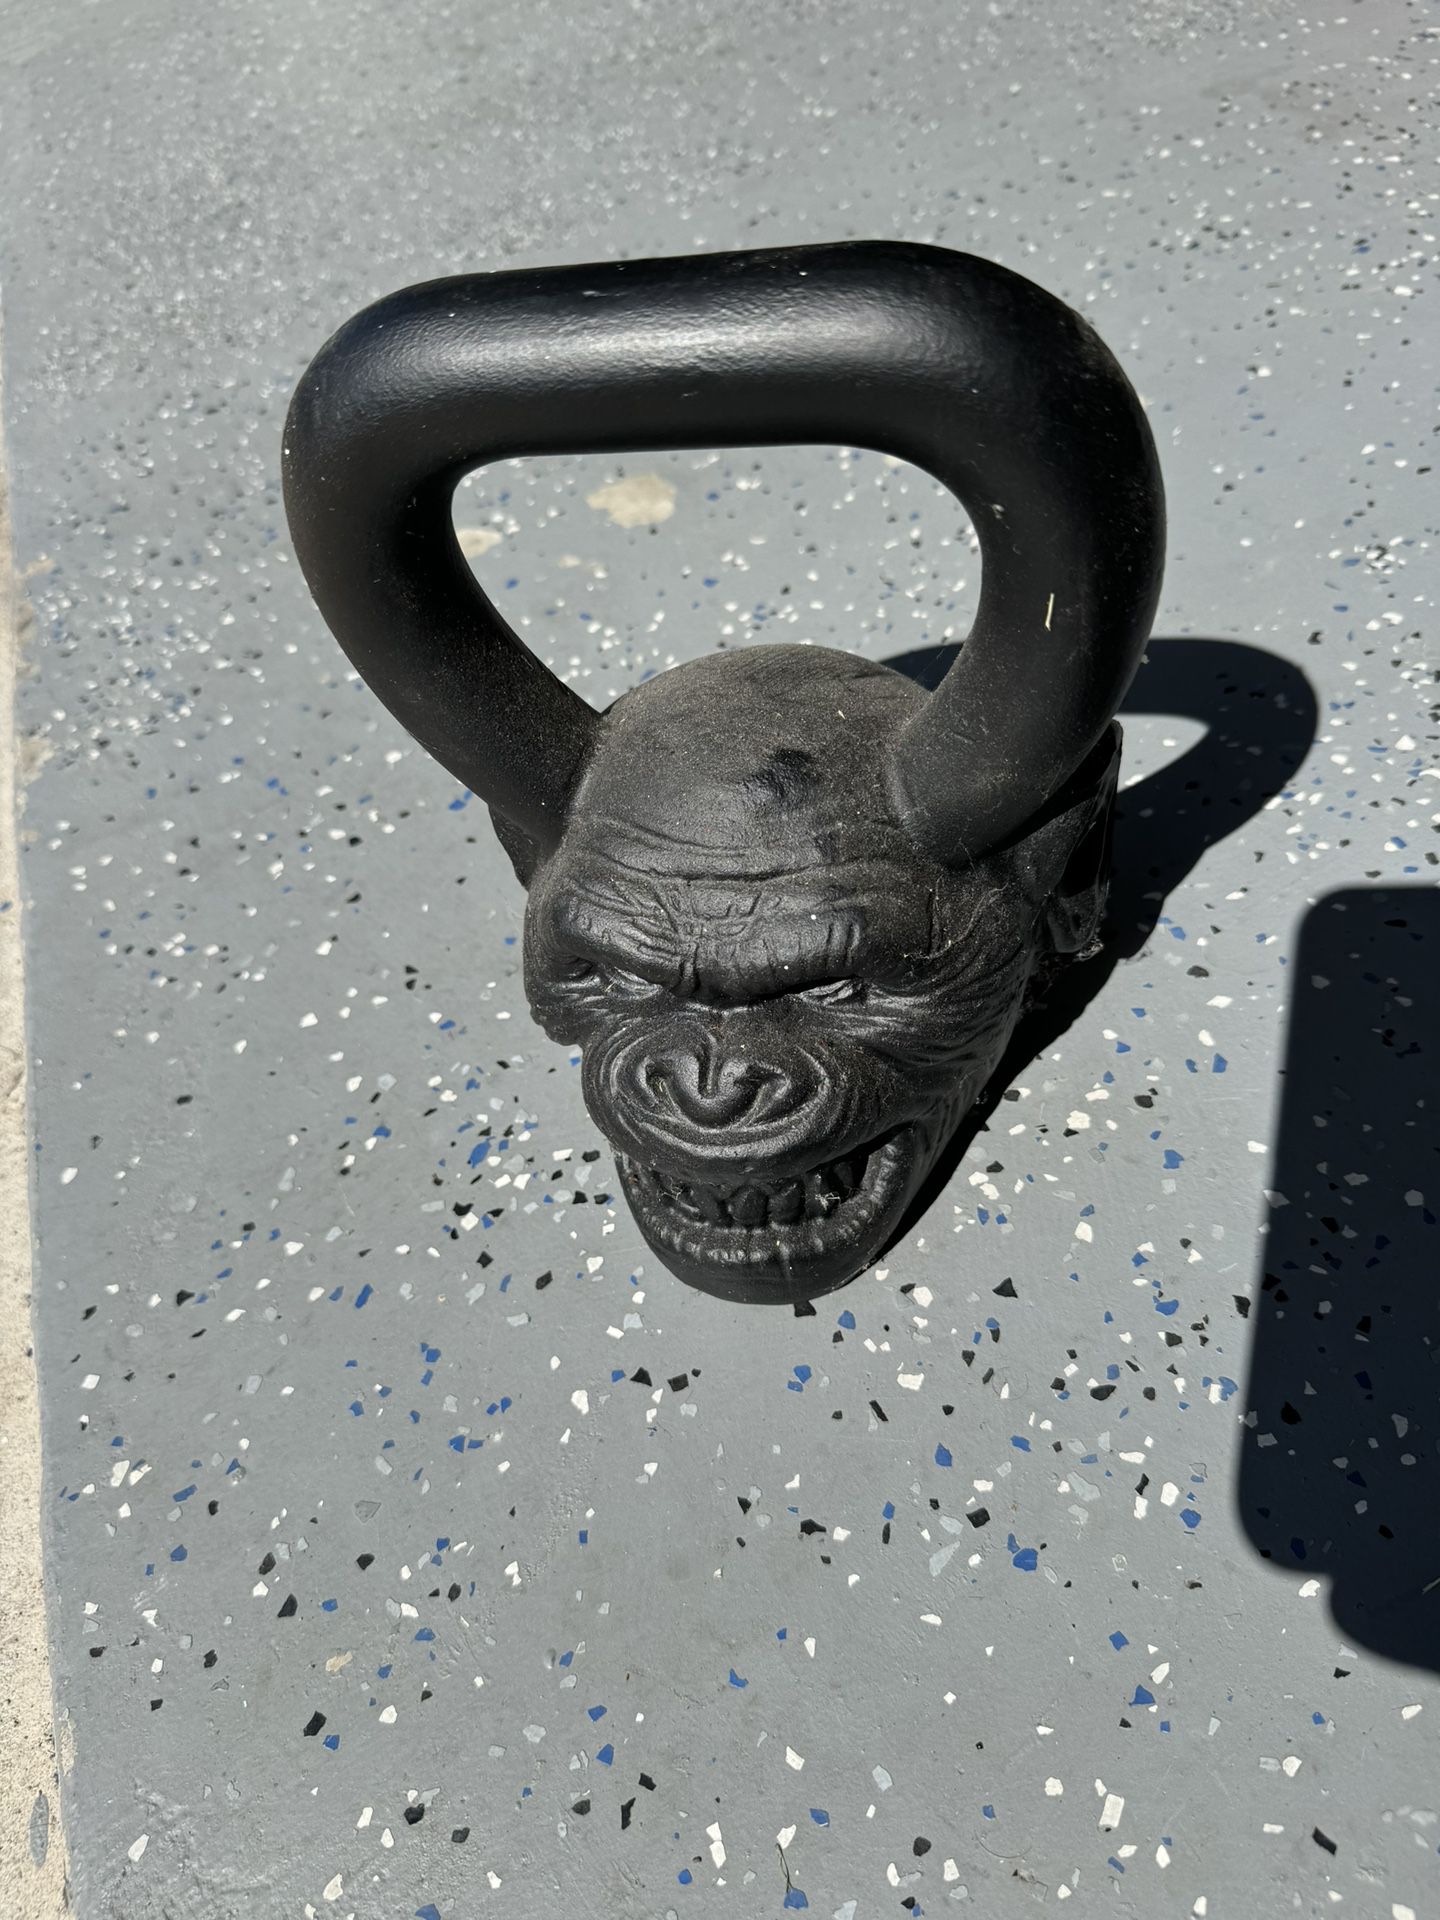 Kettle Bell Onnit